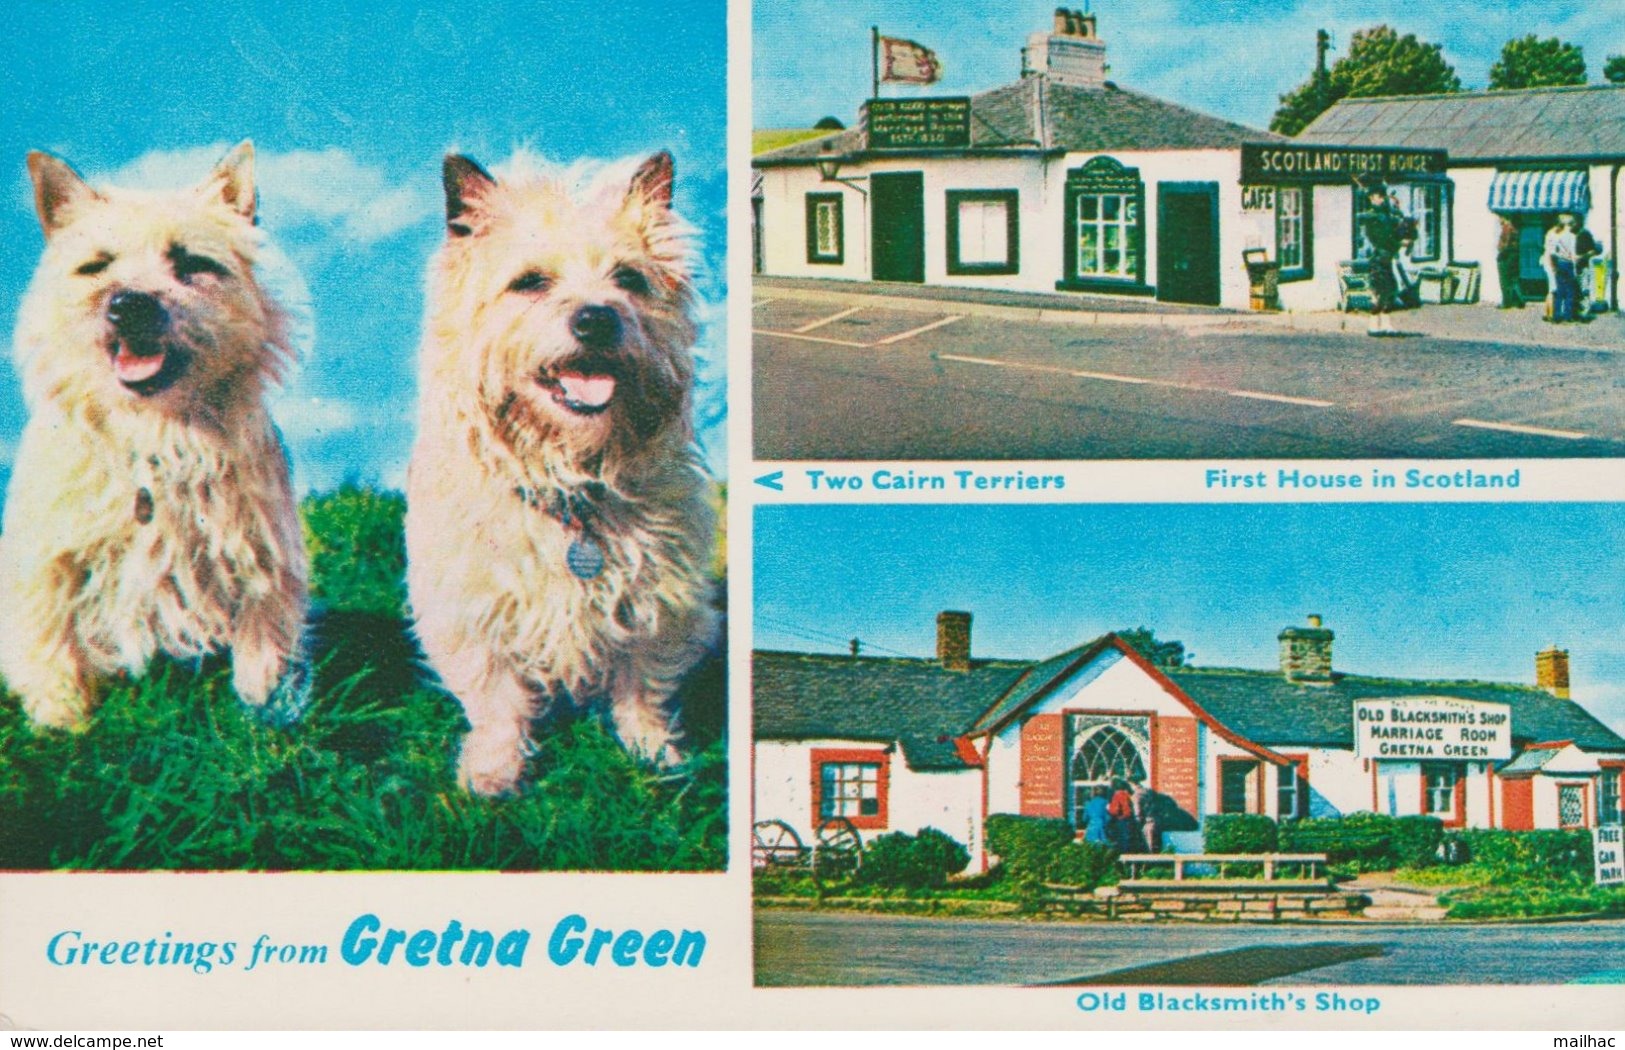 SCOTLAND - Greetins From Gretna Green - Multi Vues - Blacksmith's Shop - Cair Terriers - 1st House In Scotland - Dumfriesshire